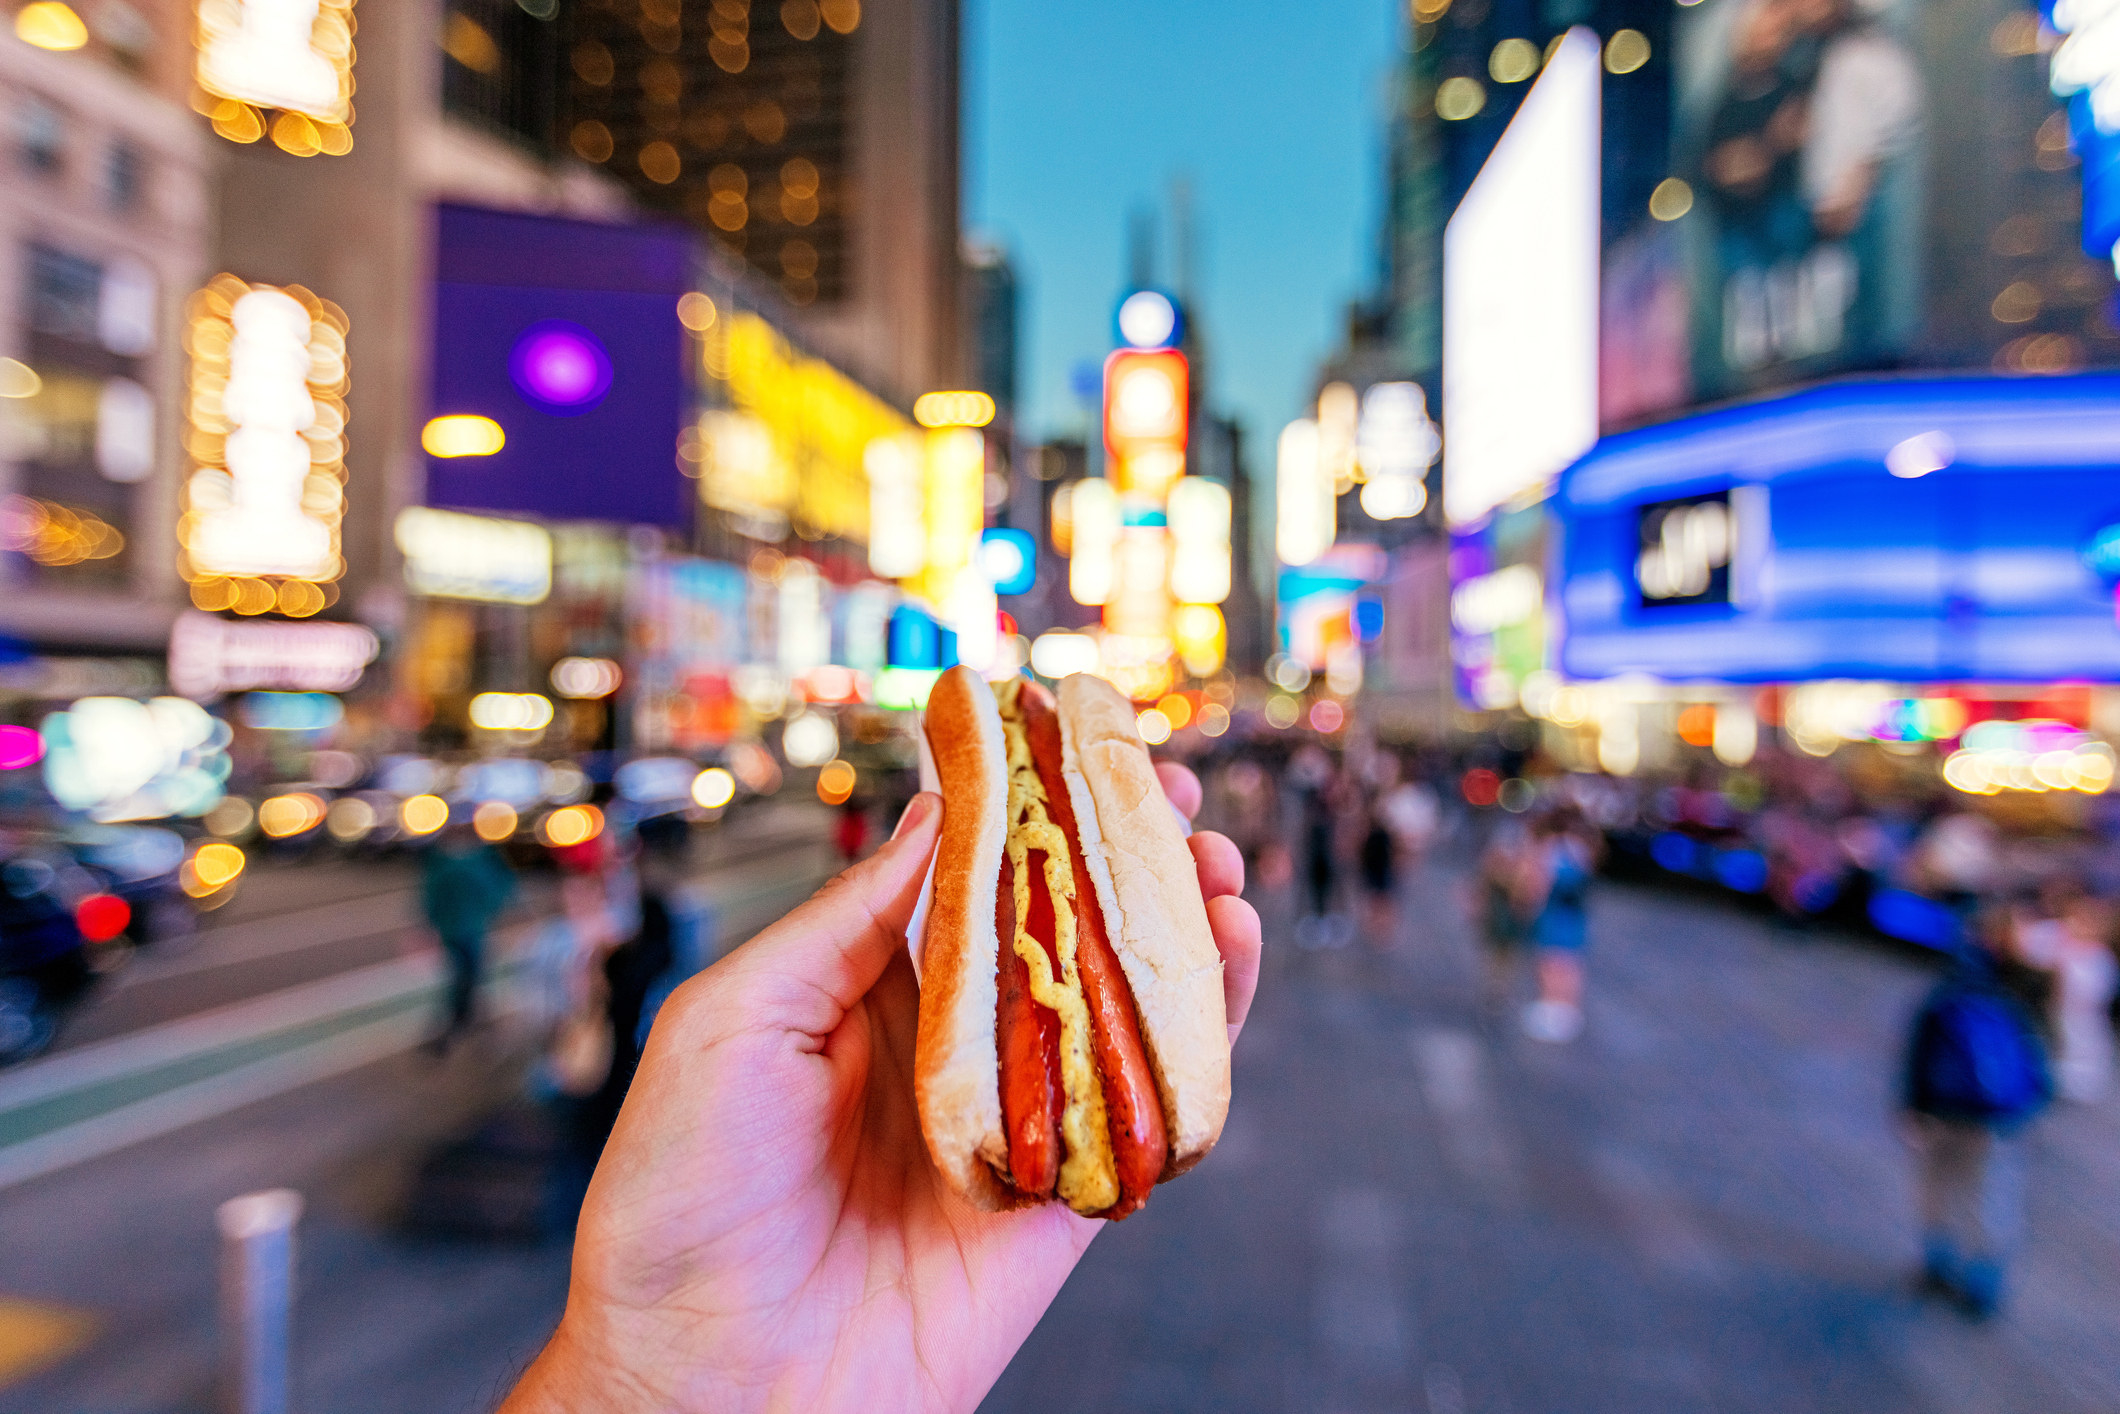 A man holding a street hot dog in NYC.